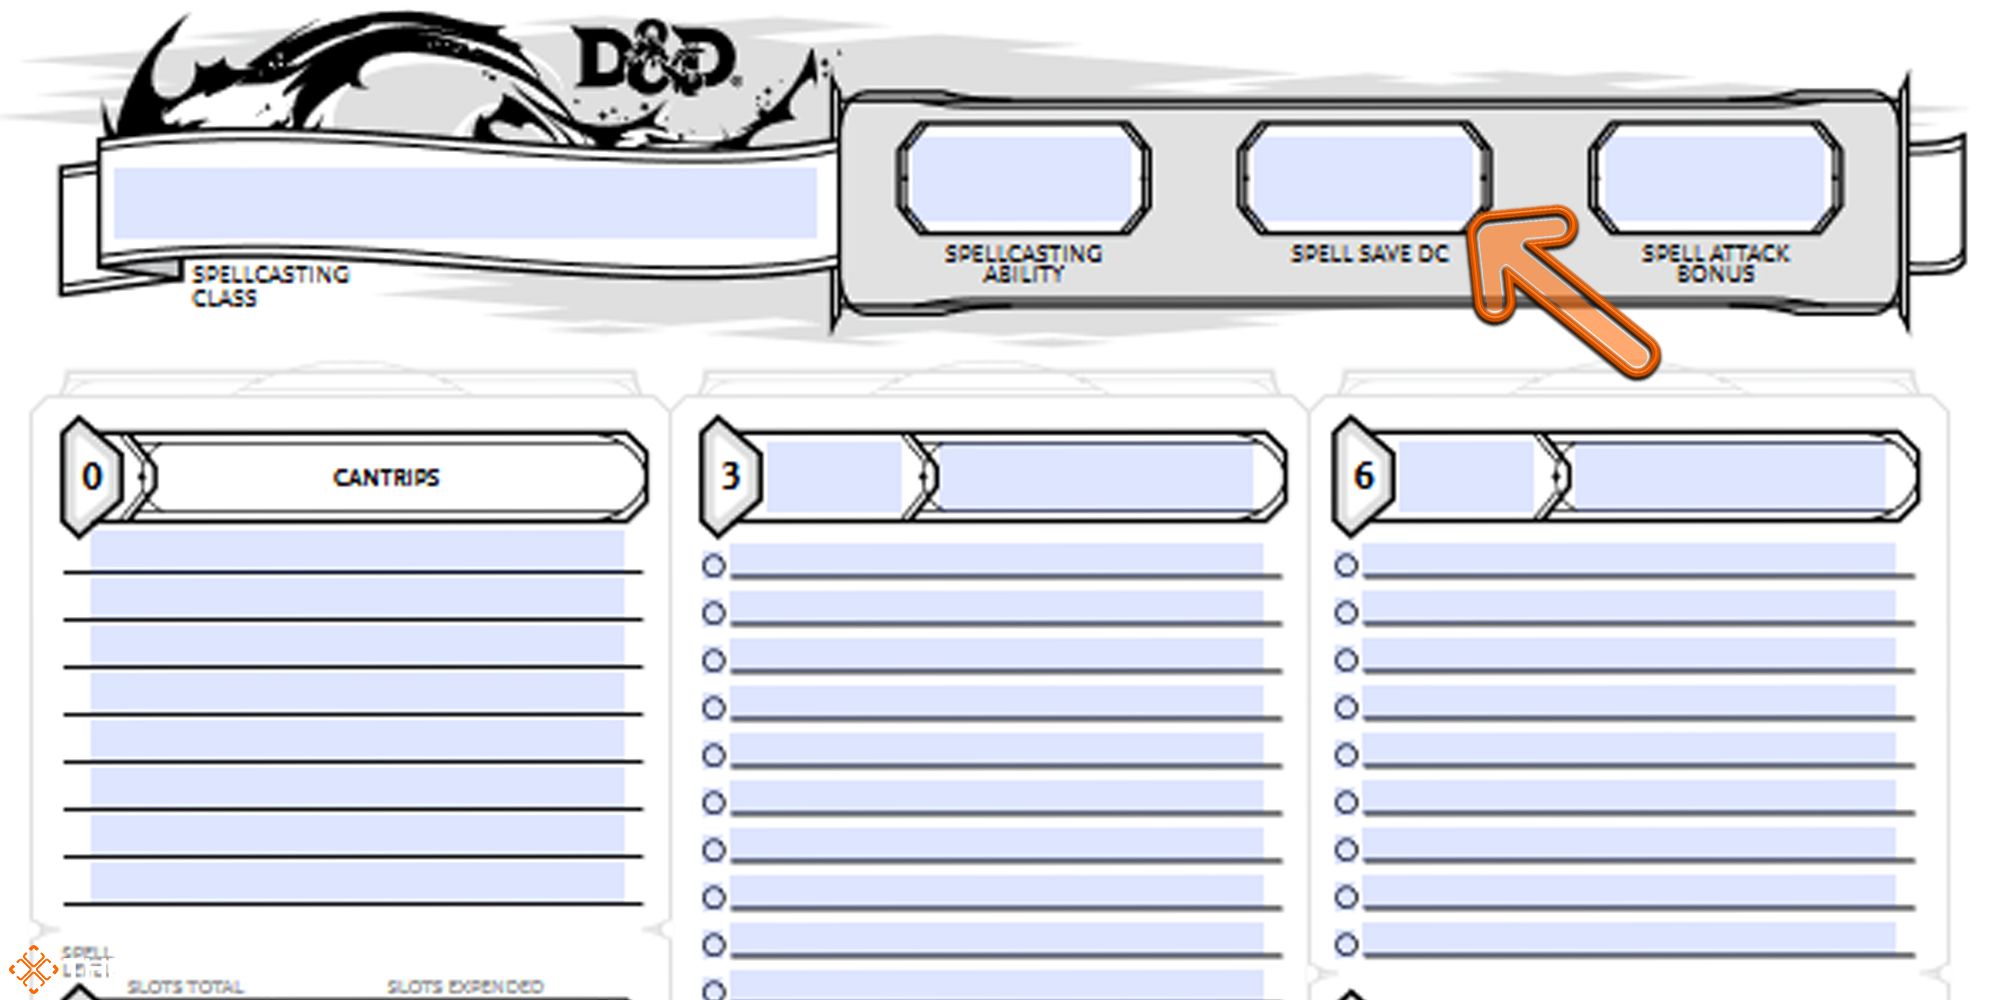 Dungeons and Dragons - character sheet, spell save DC